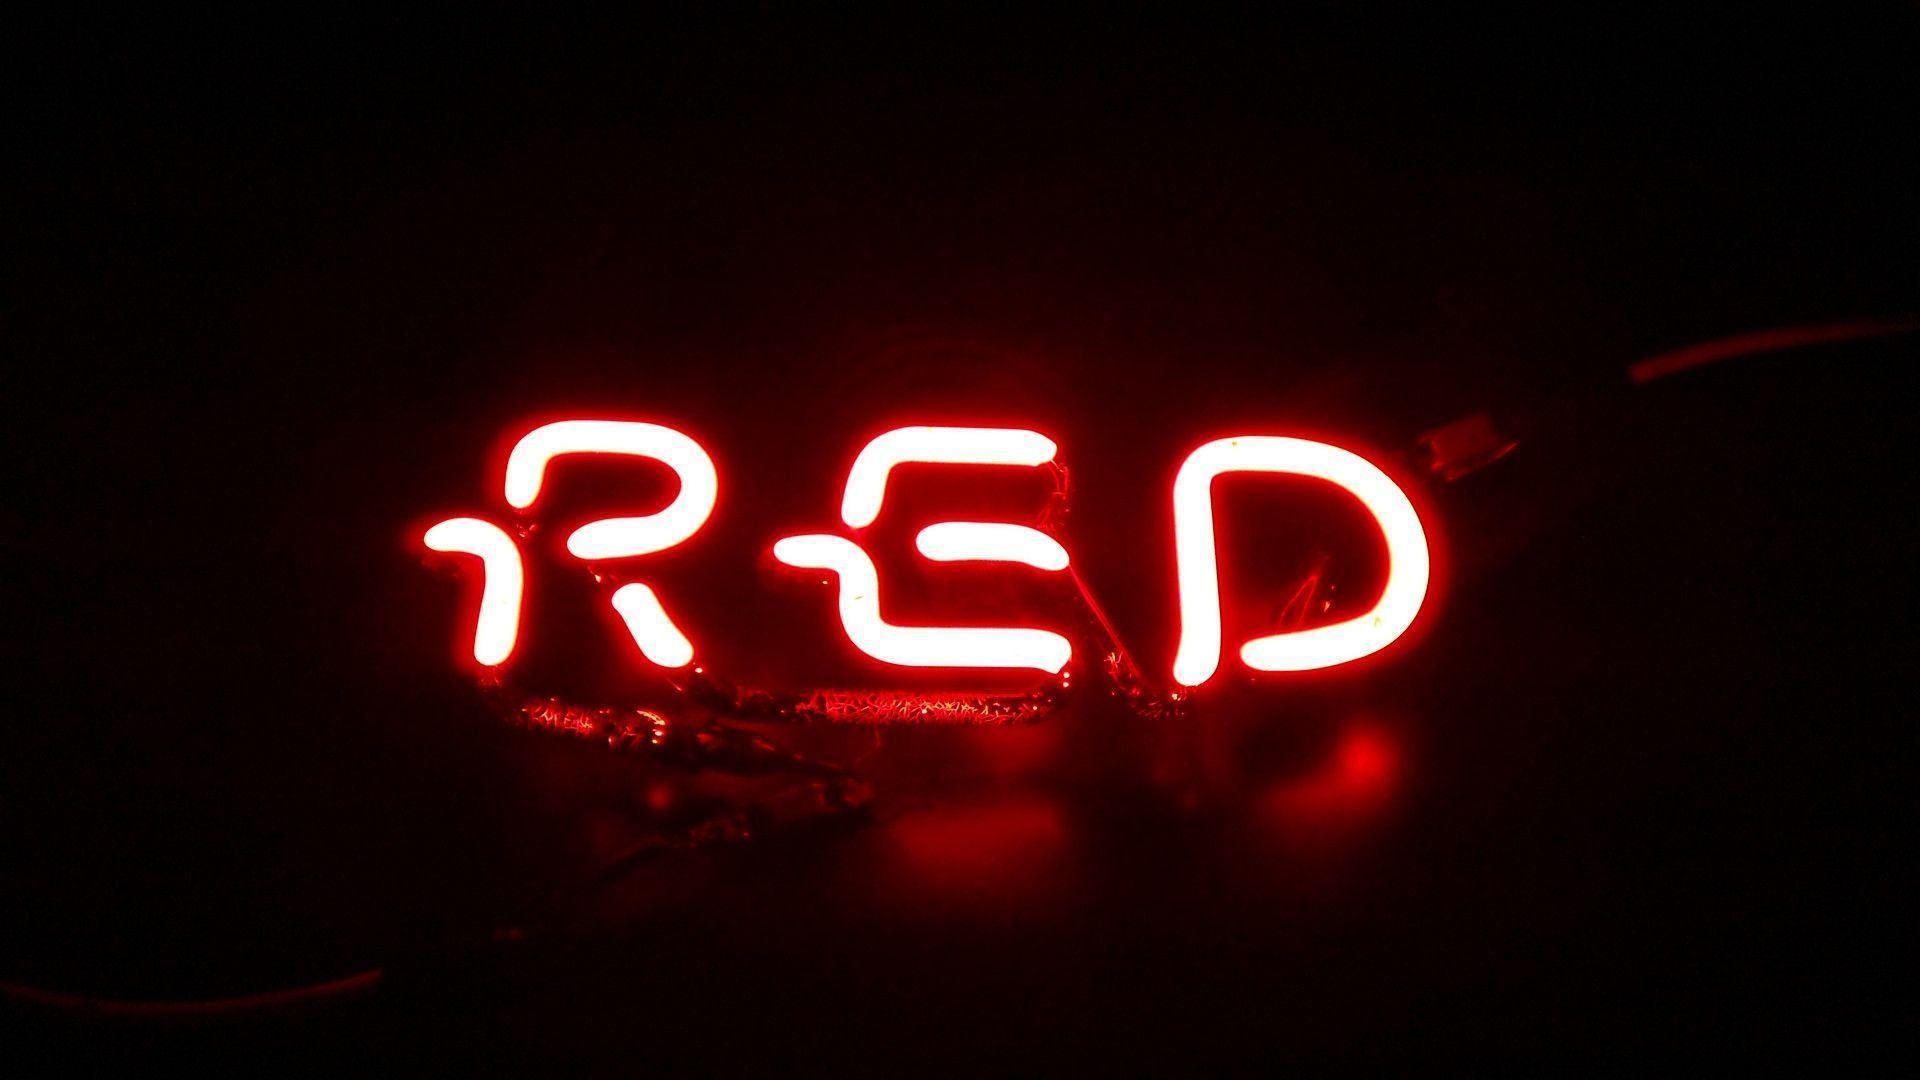 RED” neon section from Red Dog neon signThe Neon Sign Guy Store